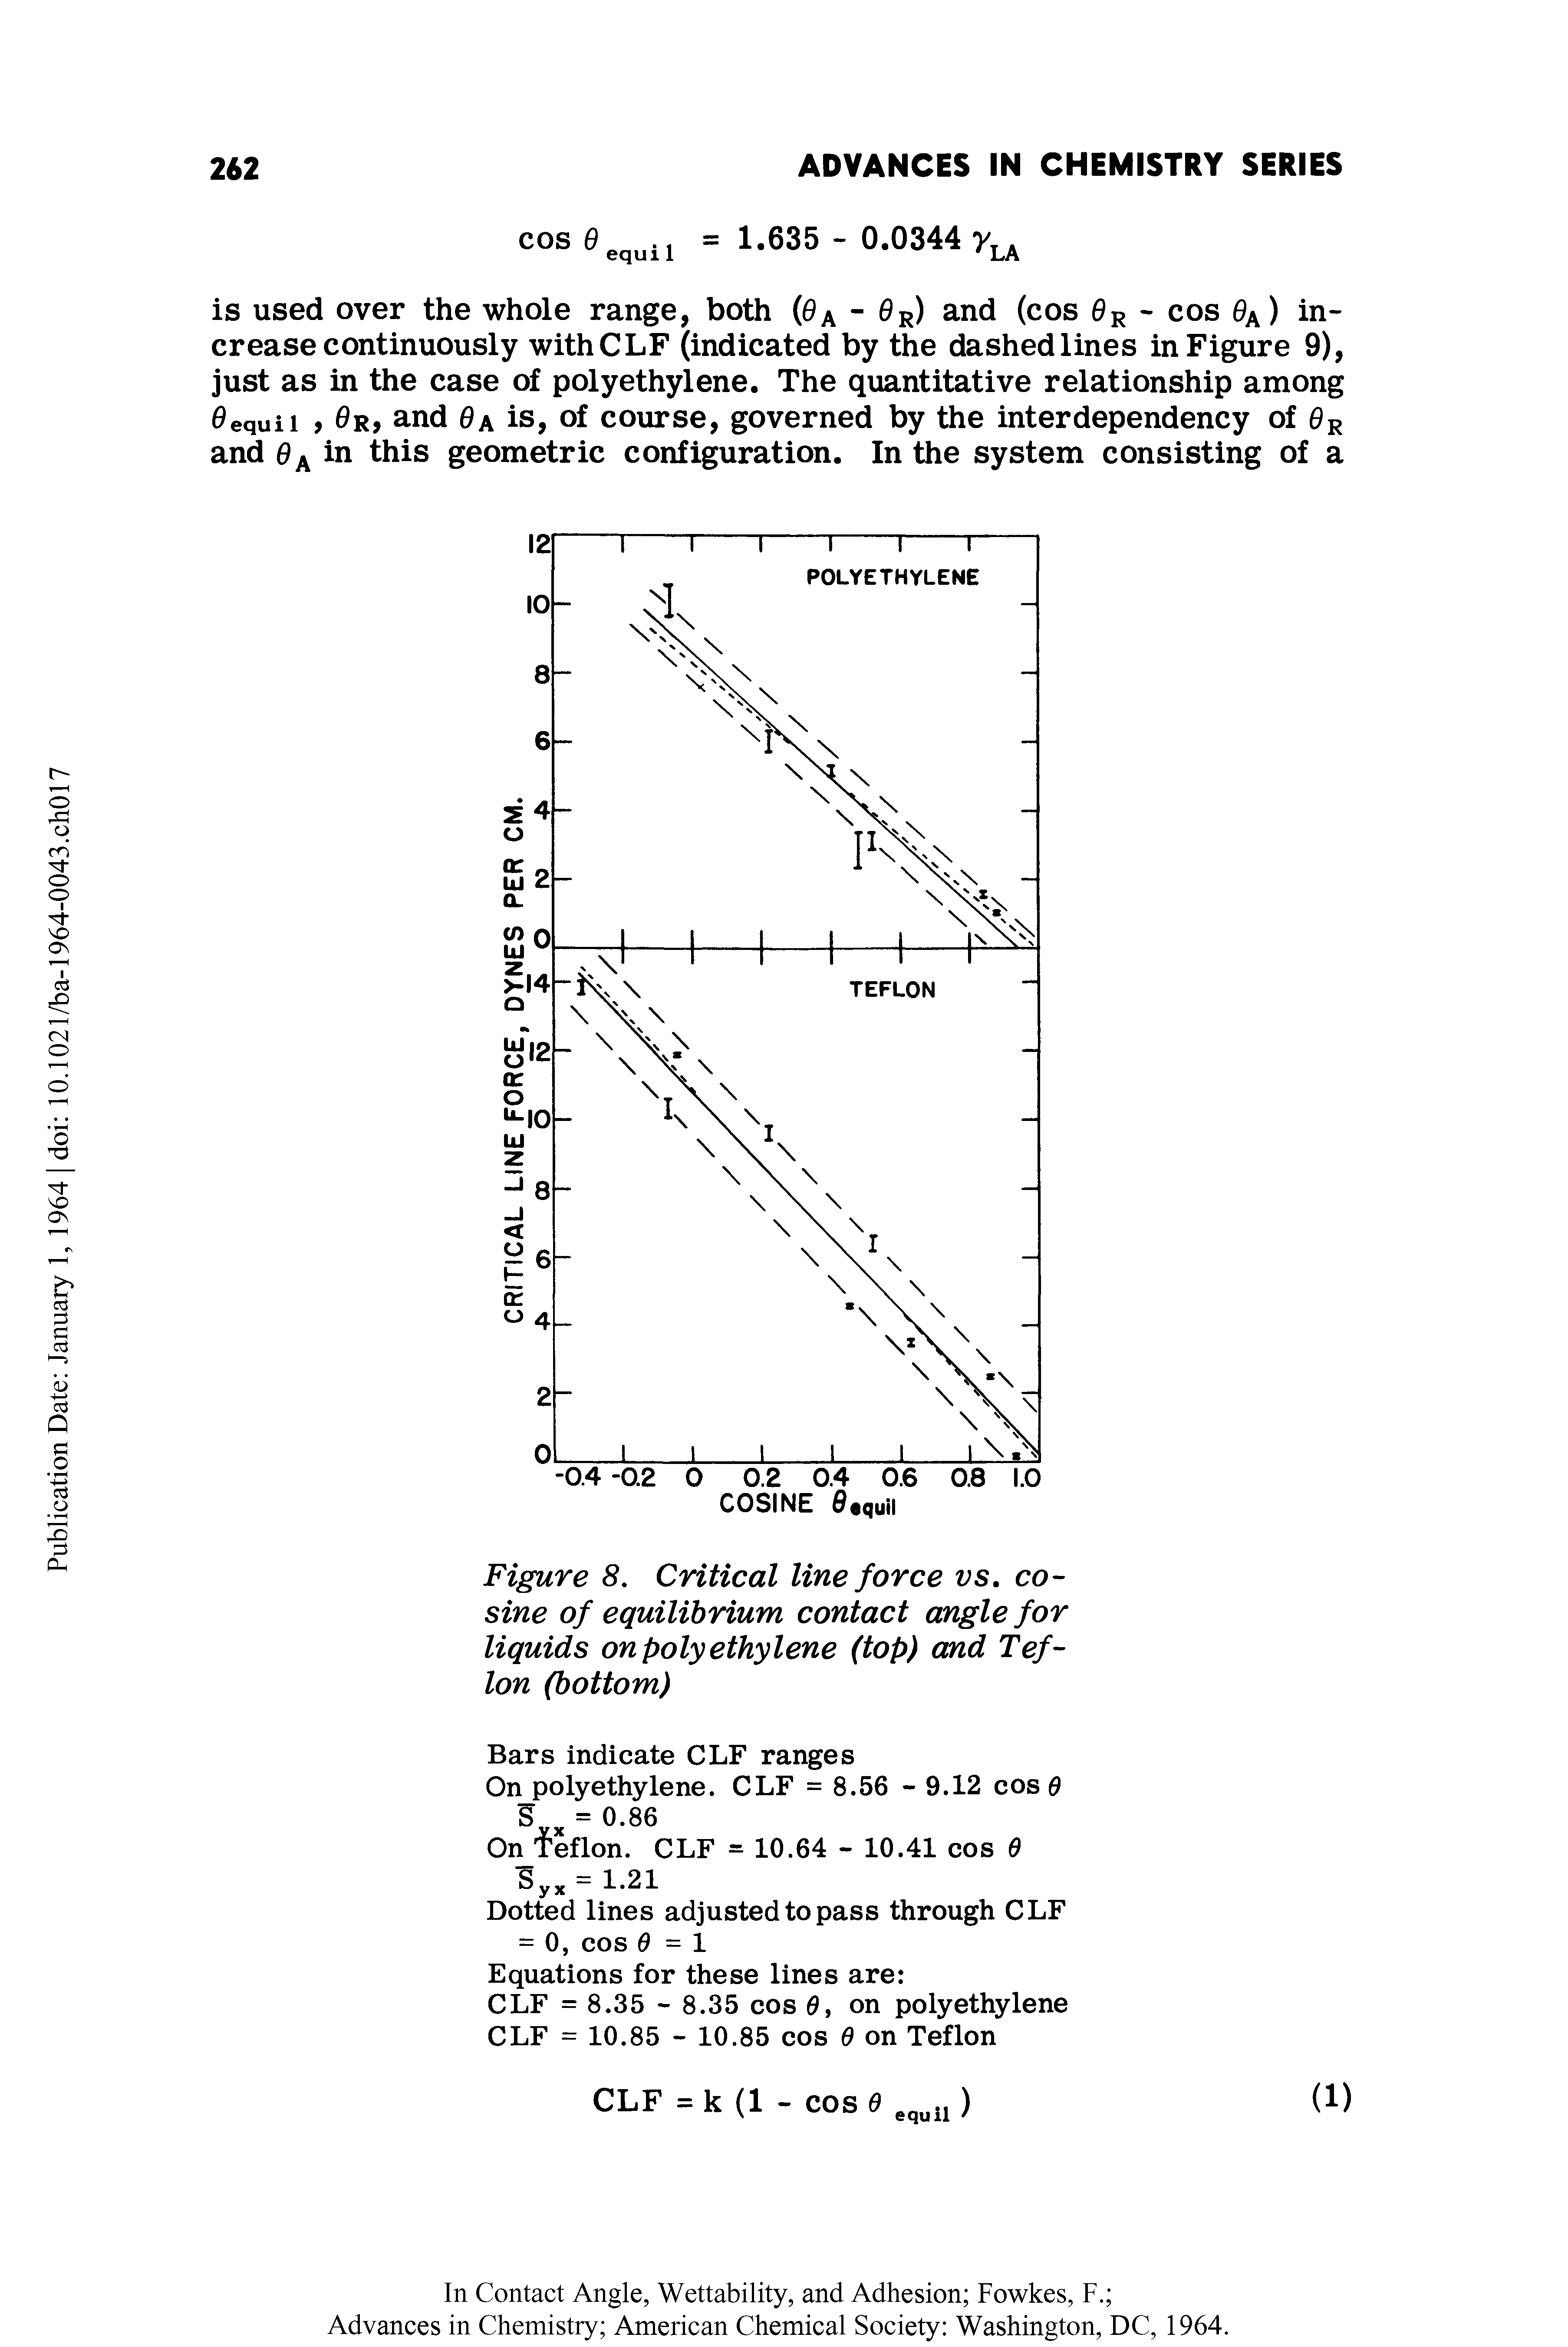 Figure 8, Critical line force vs. cosine of equilibrium contact angle for liquids on poly ethylene (top) and Teflon (bottom)...